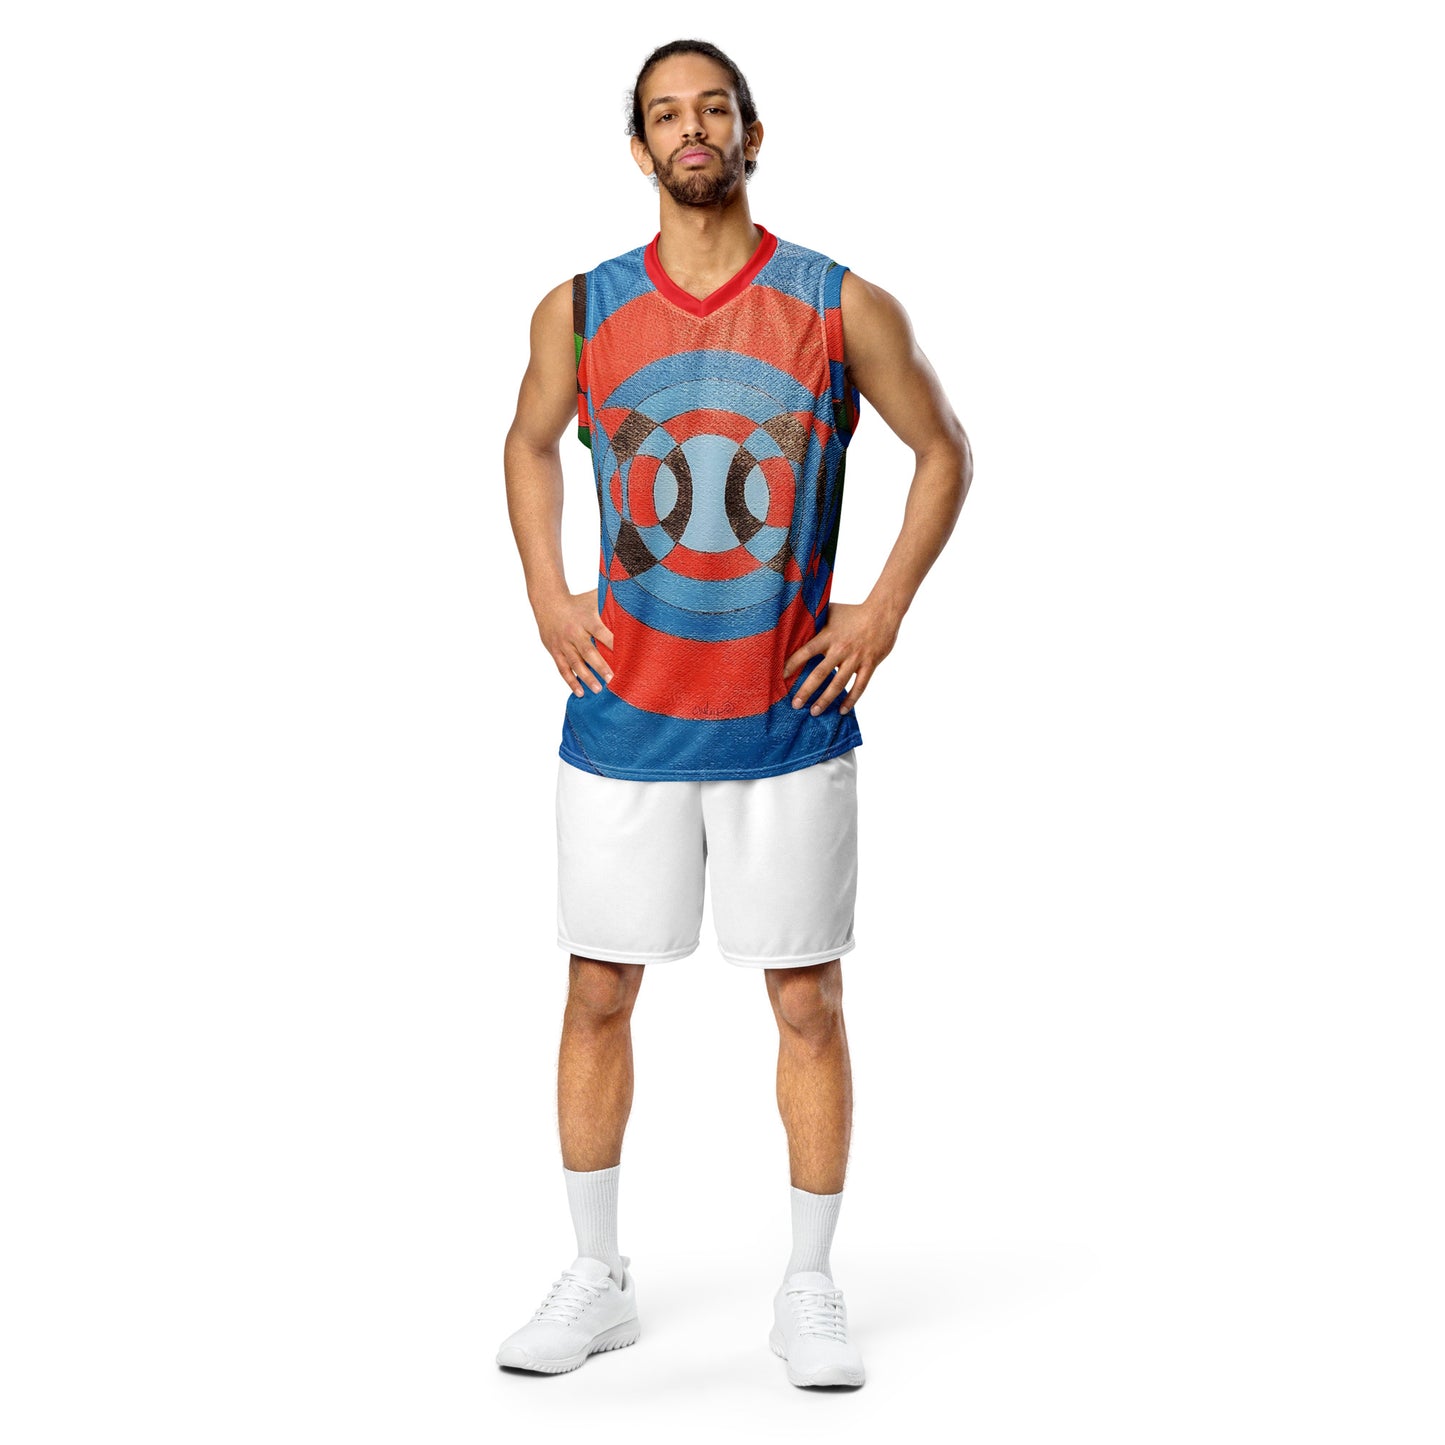 Never-ending Circles Recycled unisex basketball jersey